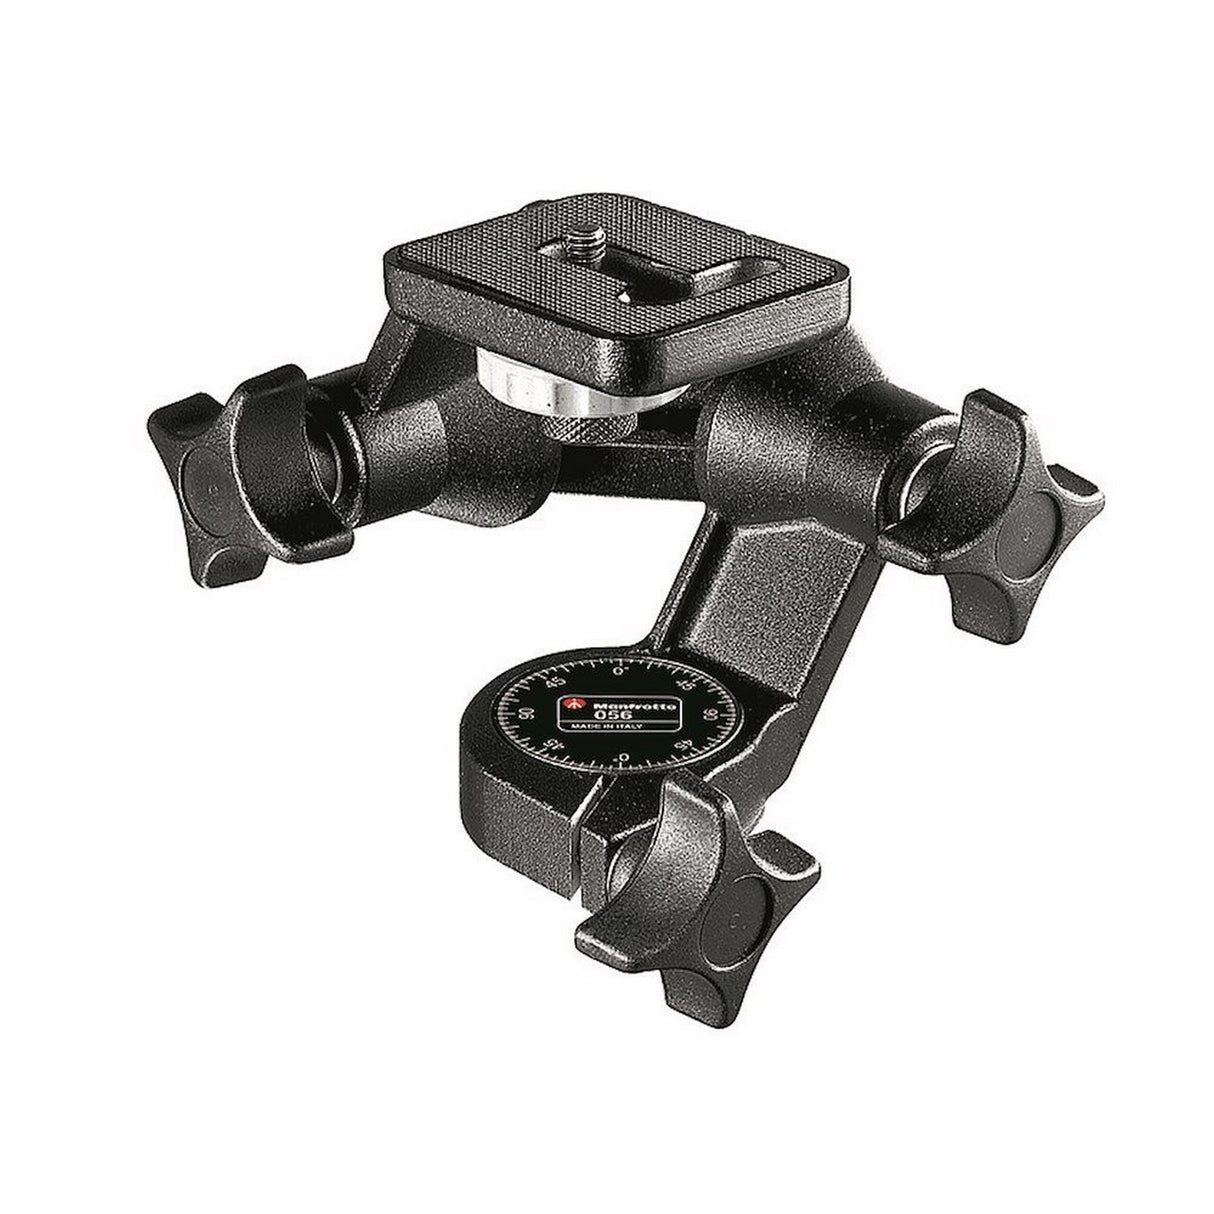 Manfrotto 056 3D Junior Pan/Tilt Tripod Head with Individual Axis Control